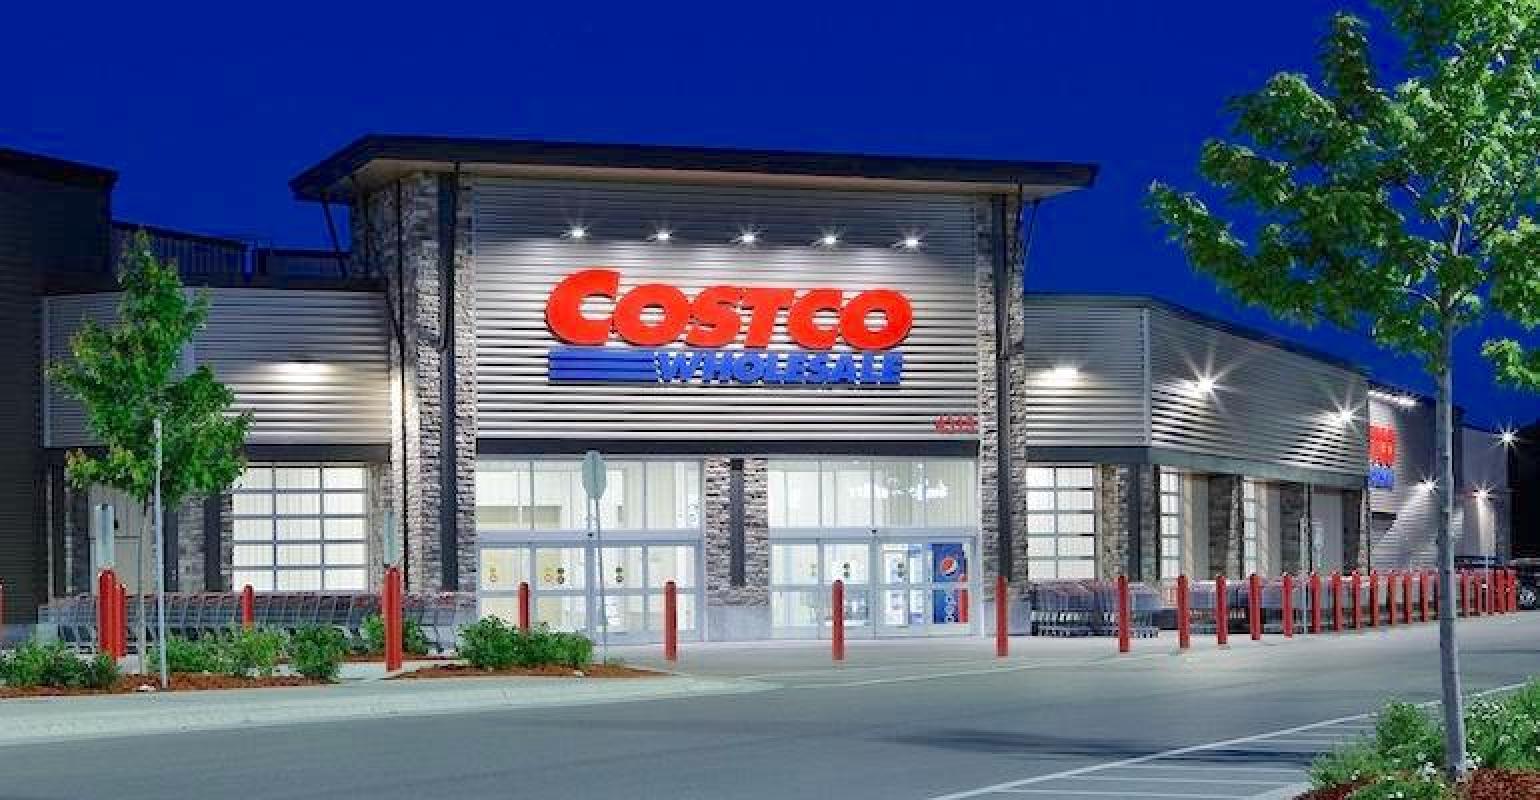 Costco earns kudos as Canada’s ‘most respected’ grocer Supermarket News